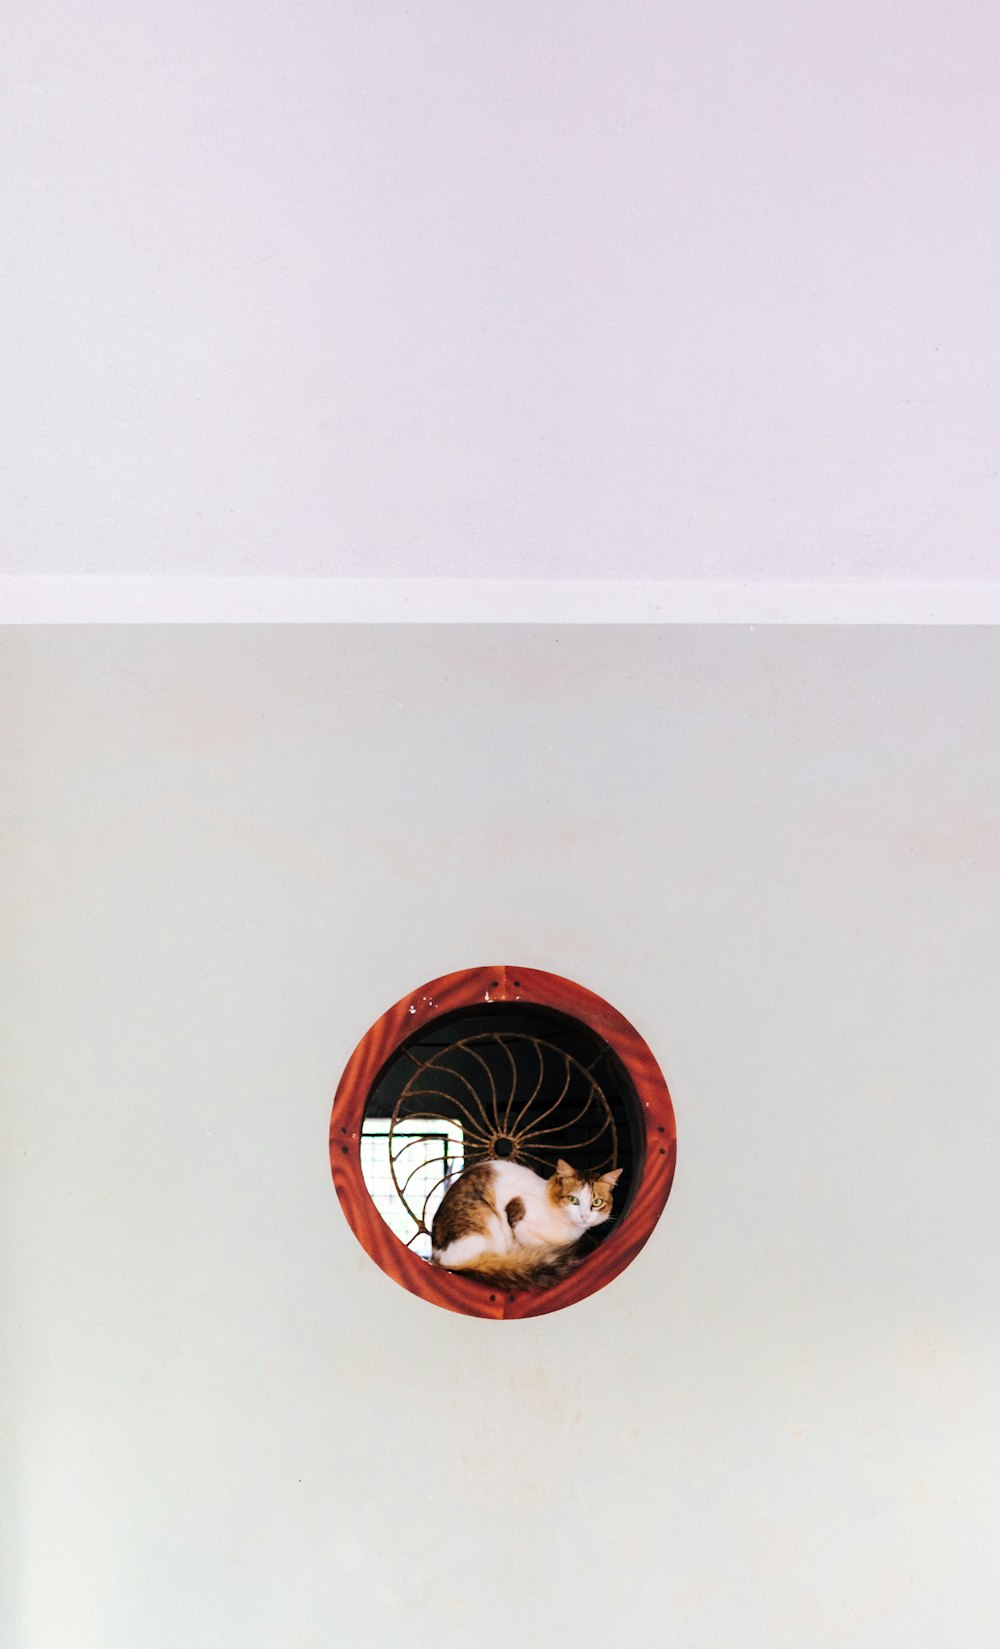 a cat sitting inside of a round window